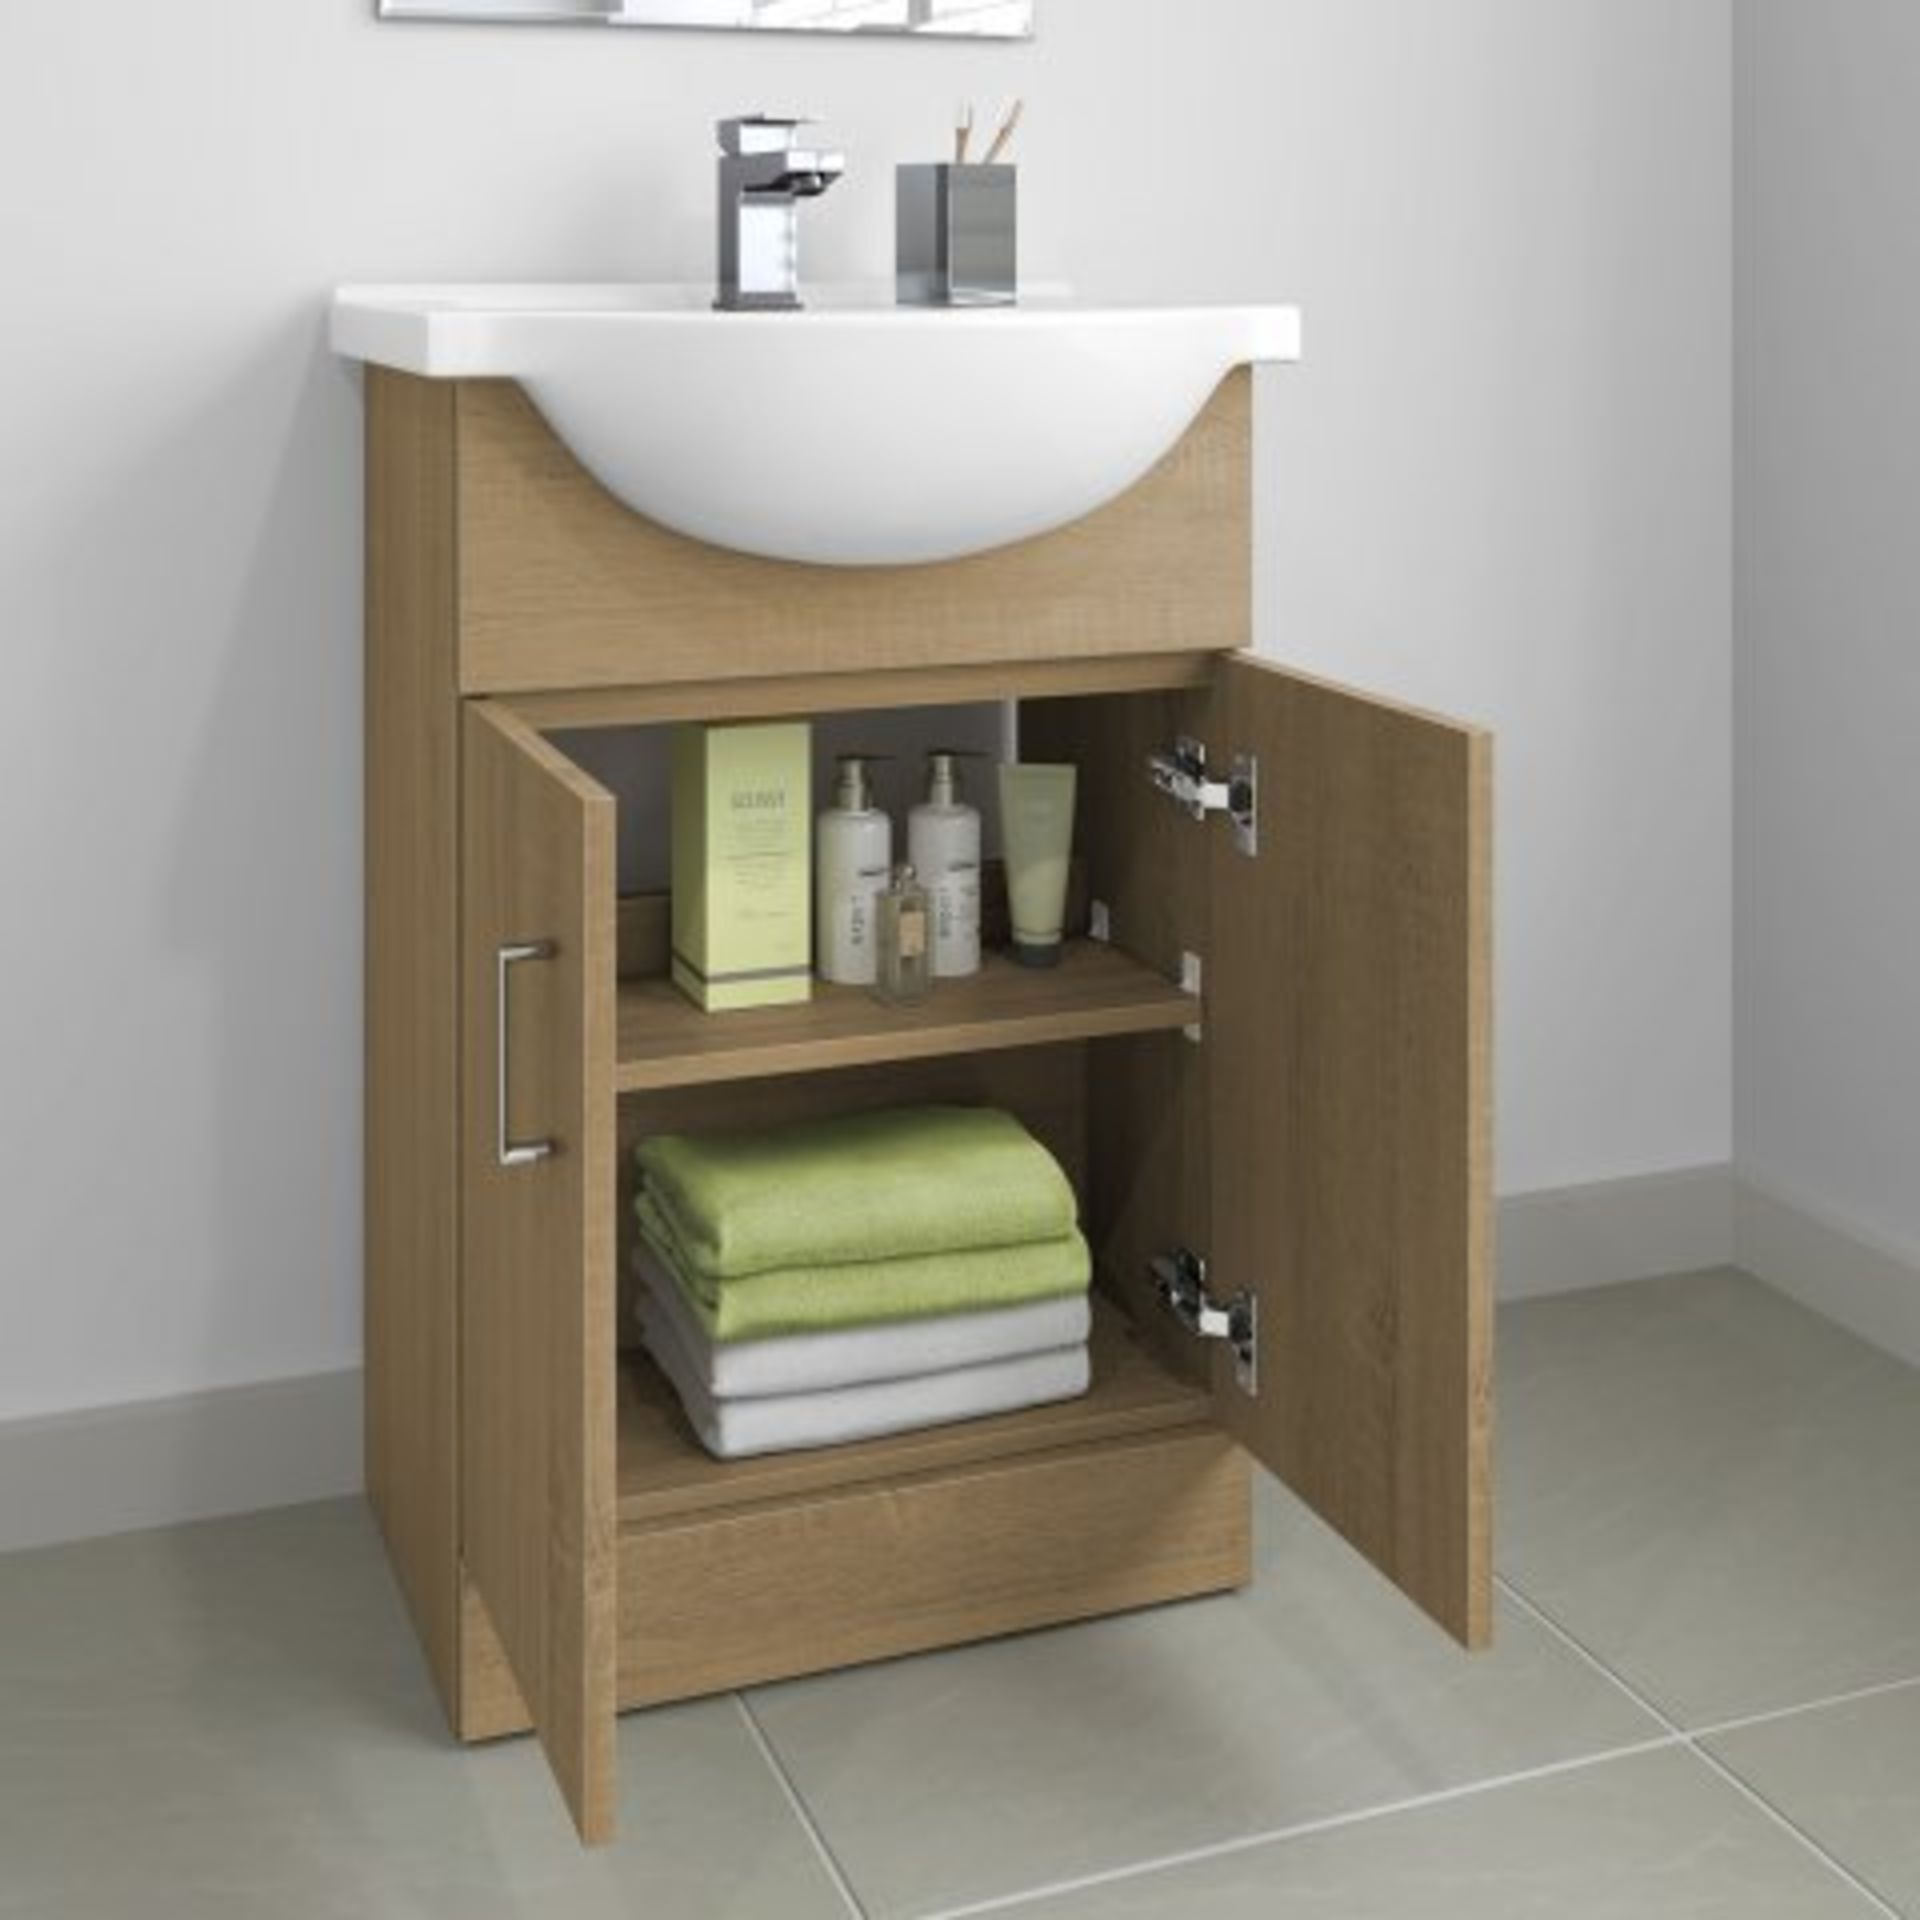 (34) 550x300mm Quartz Oak Effect Built In Basin Cabinet. RRP £299.99. COMES COMPLETE WITH BASIN. - Image 2 of 4